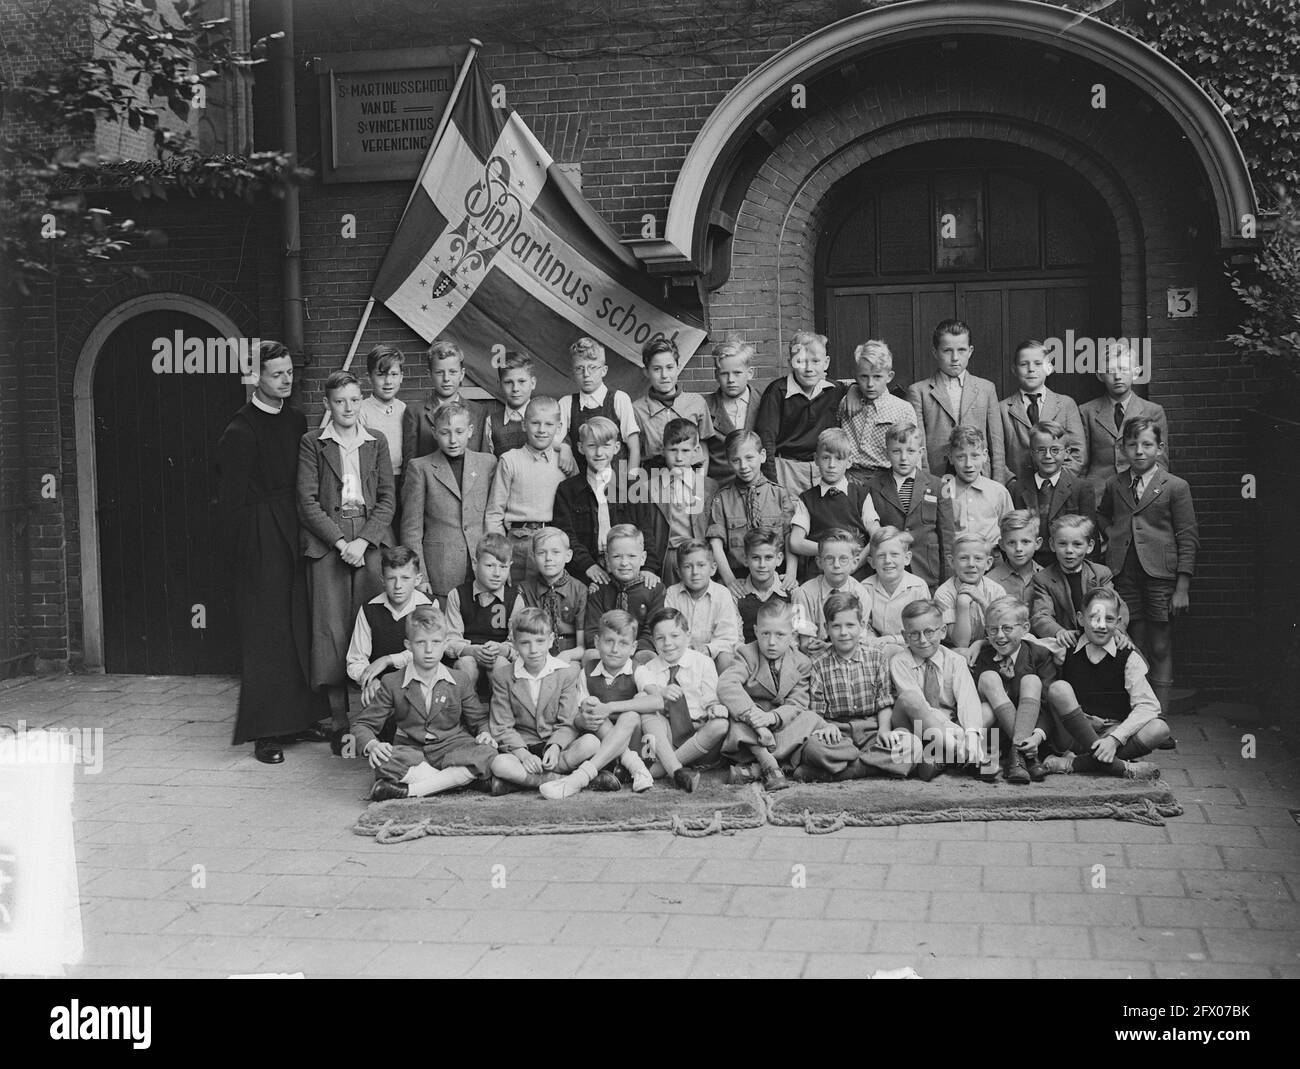 School Servaes Noutstraat Saint Martinus School, July 6, 1949, SCHOOL, The Netherlands, 20th century press agency photo, news to remember, documentary, historic photography 1945-1990, visual stories, human history of the Twentieth Century, capturing moments in time Stock Photo